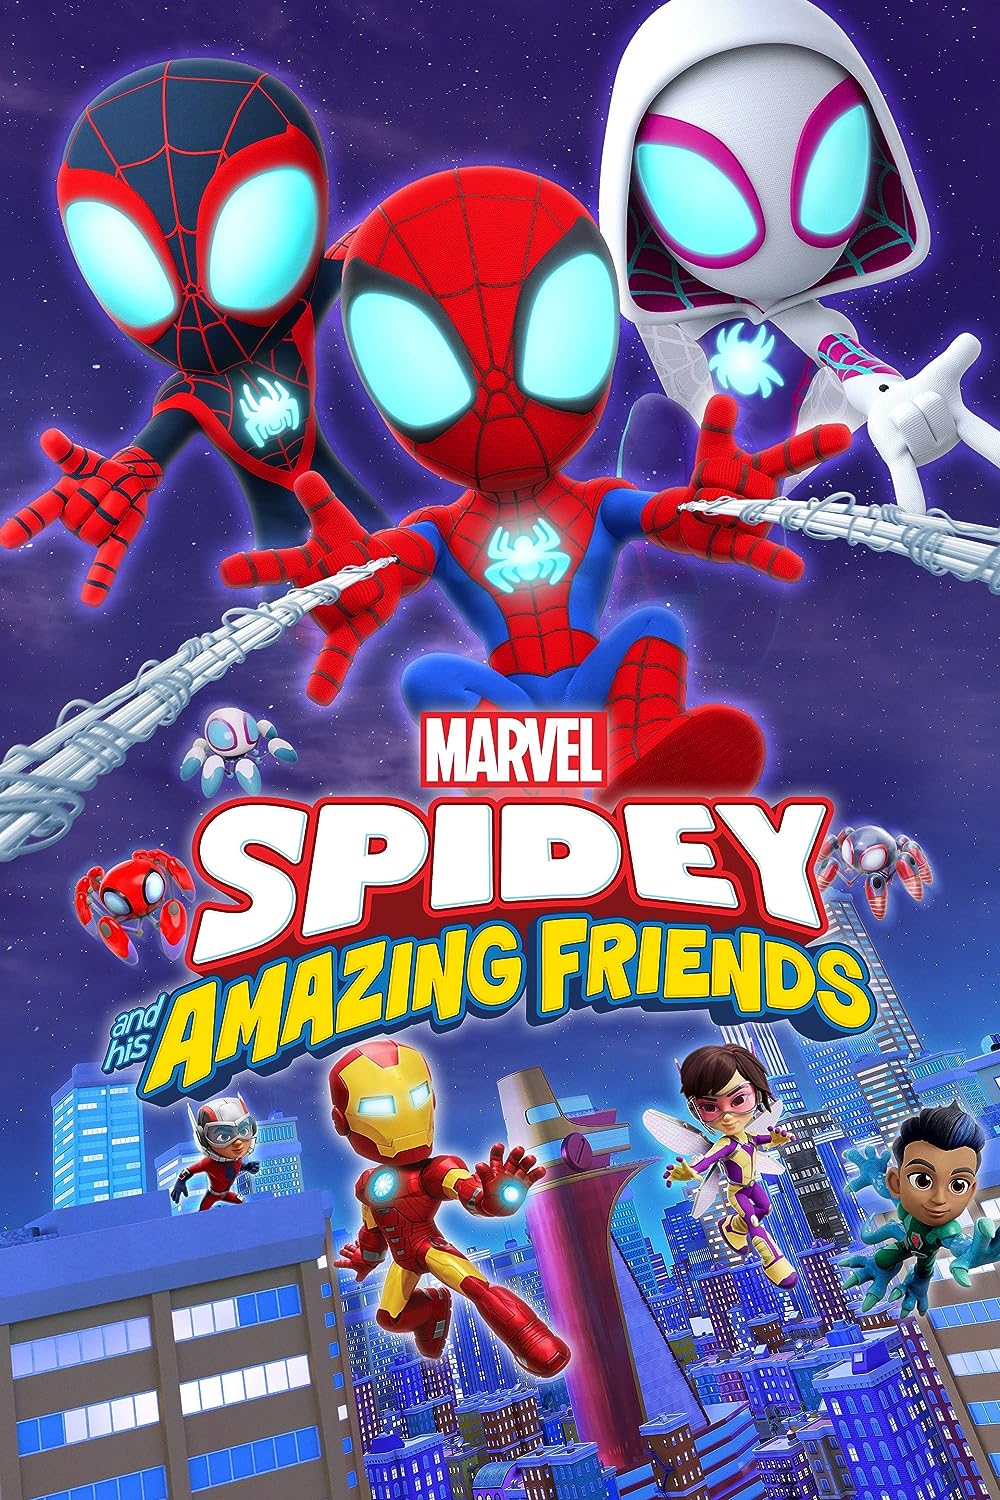 spidey and his amazing friends download free